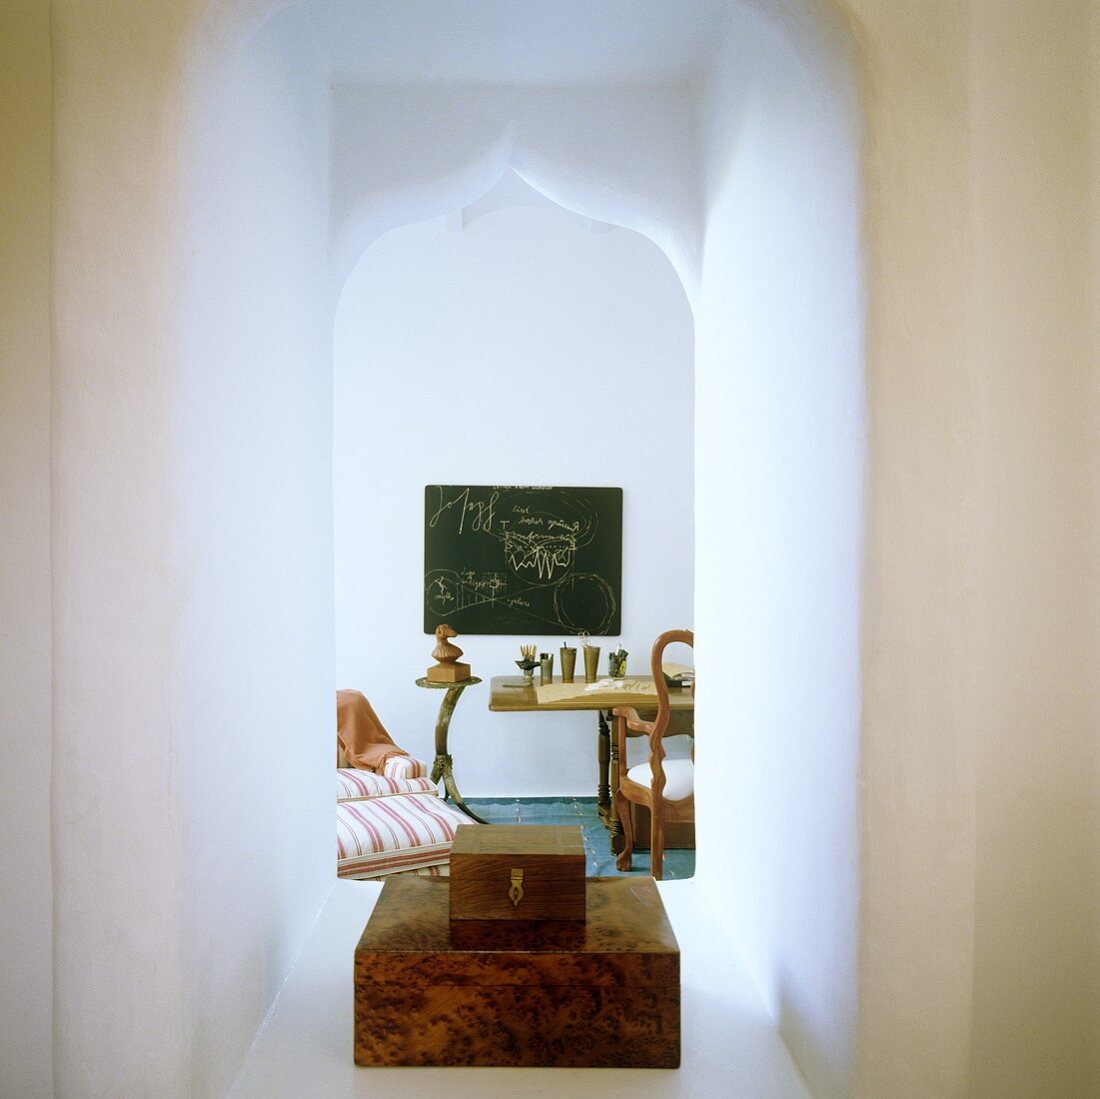 A stack of wooden boxes in a Moorish archway with a view onto a dining table